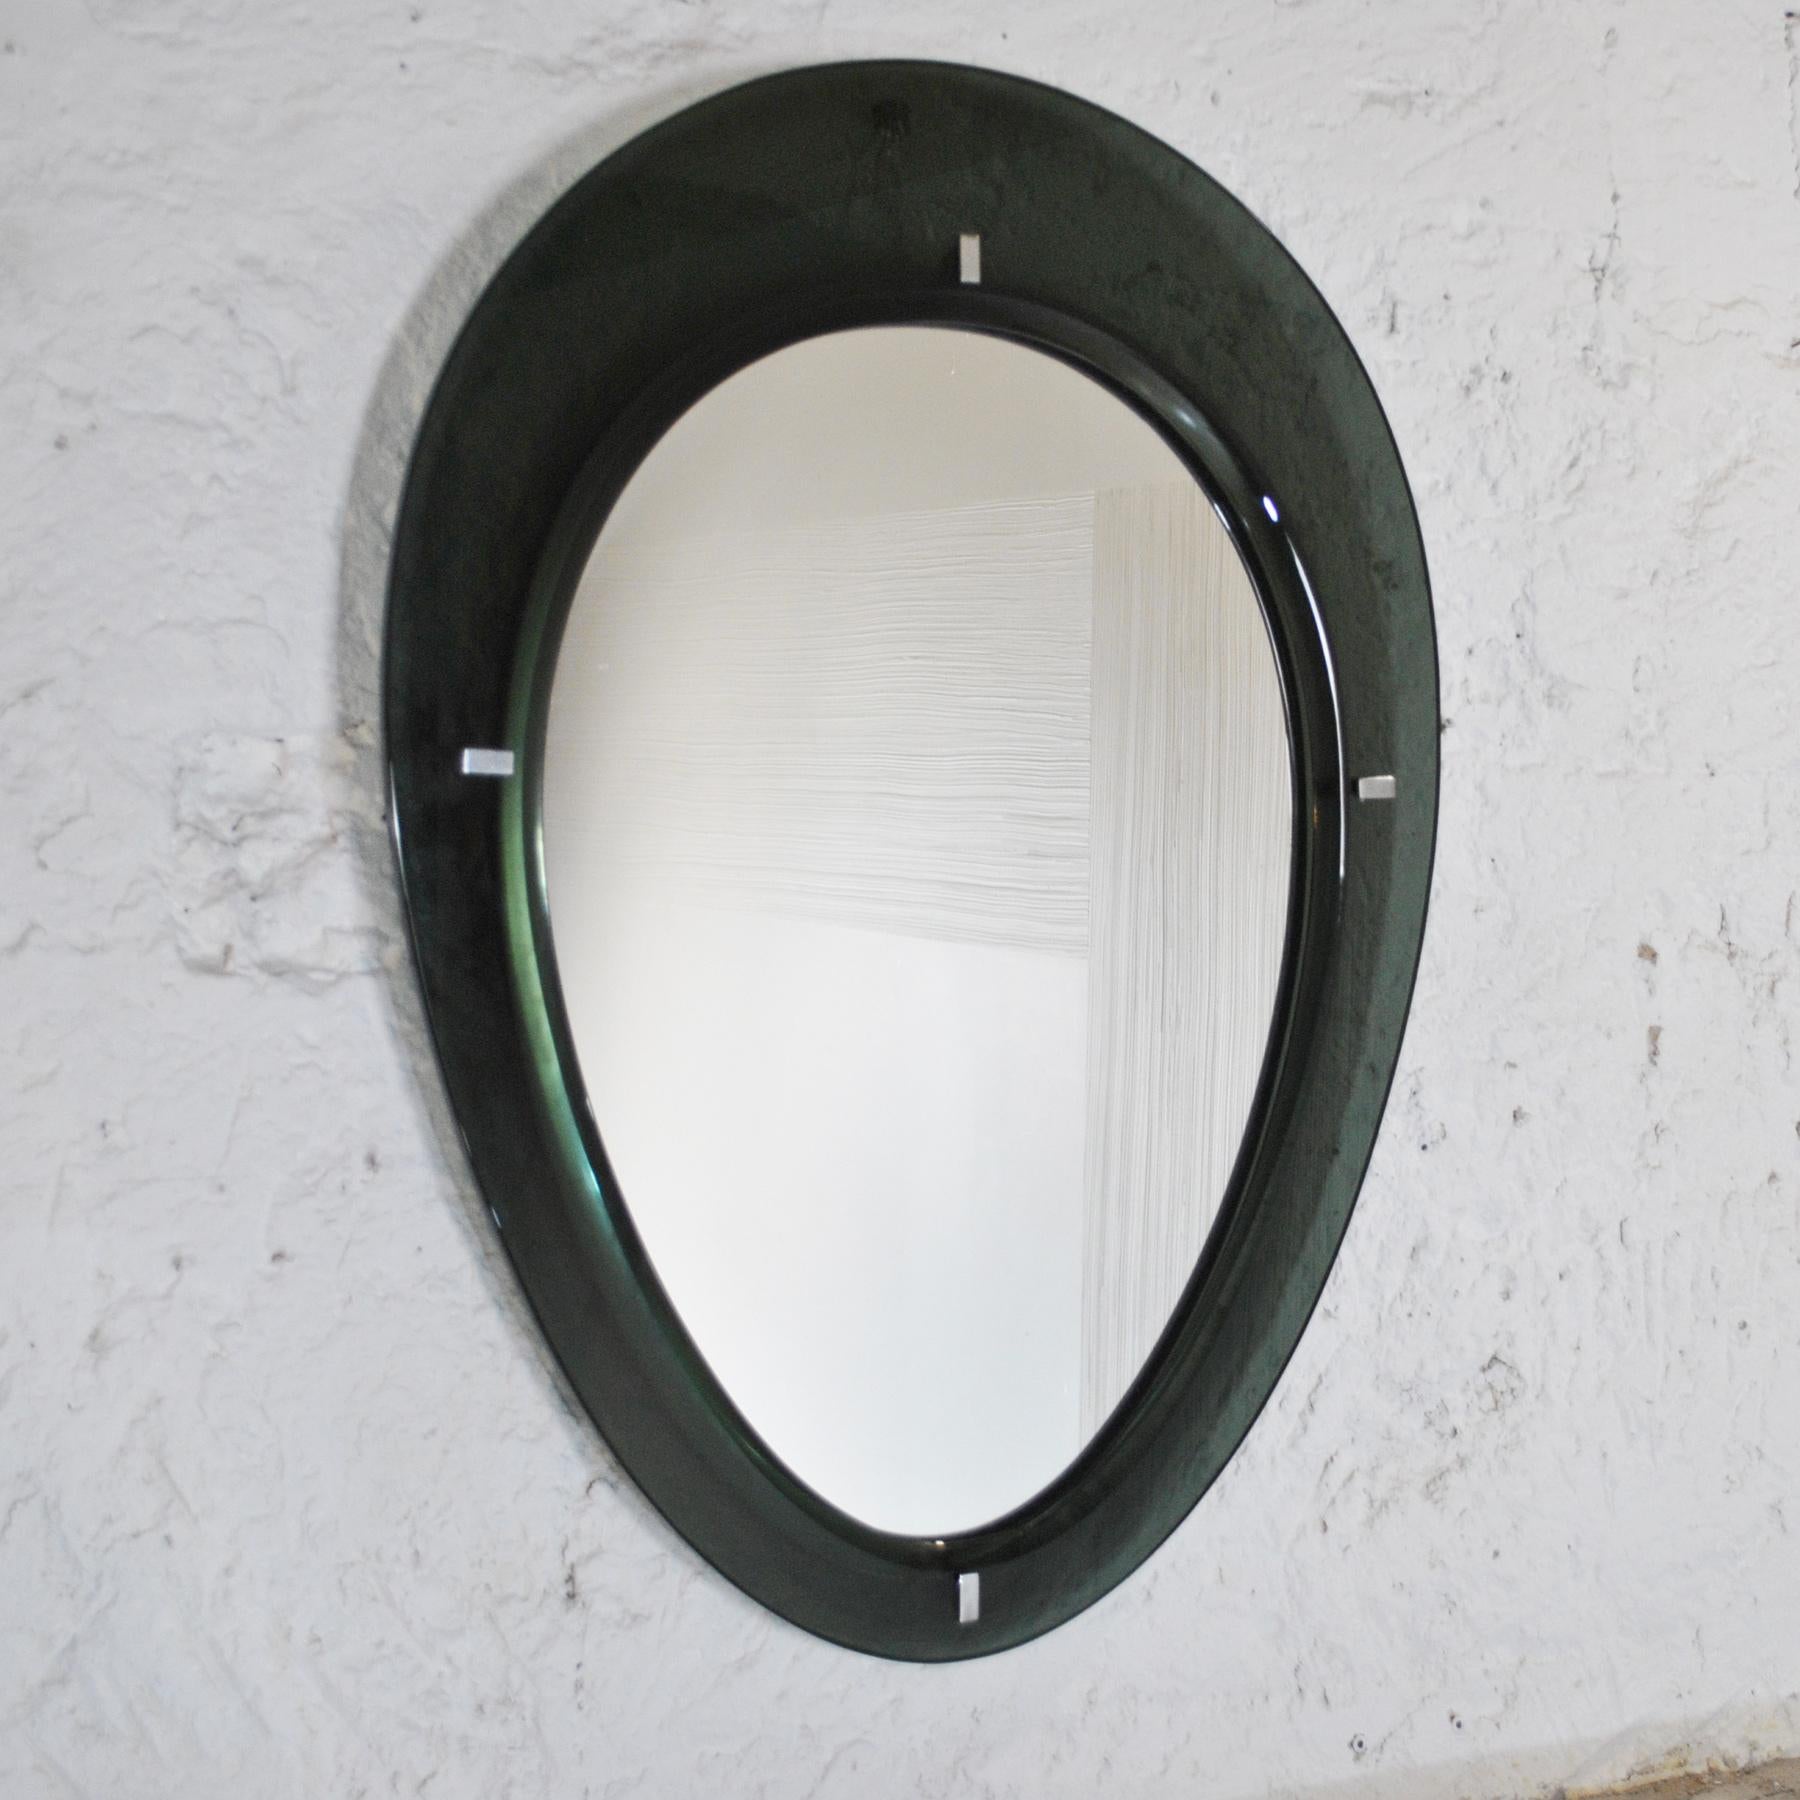 Superb mirror from the 50s, rounded and thick glass circumference in wood color, Italian production Cristal Art.